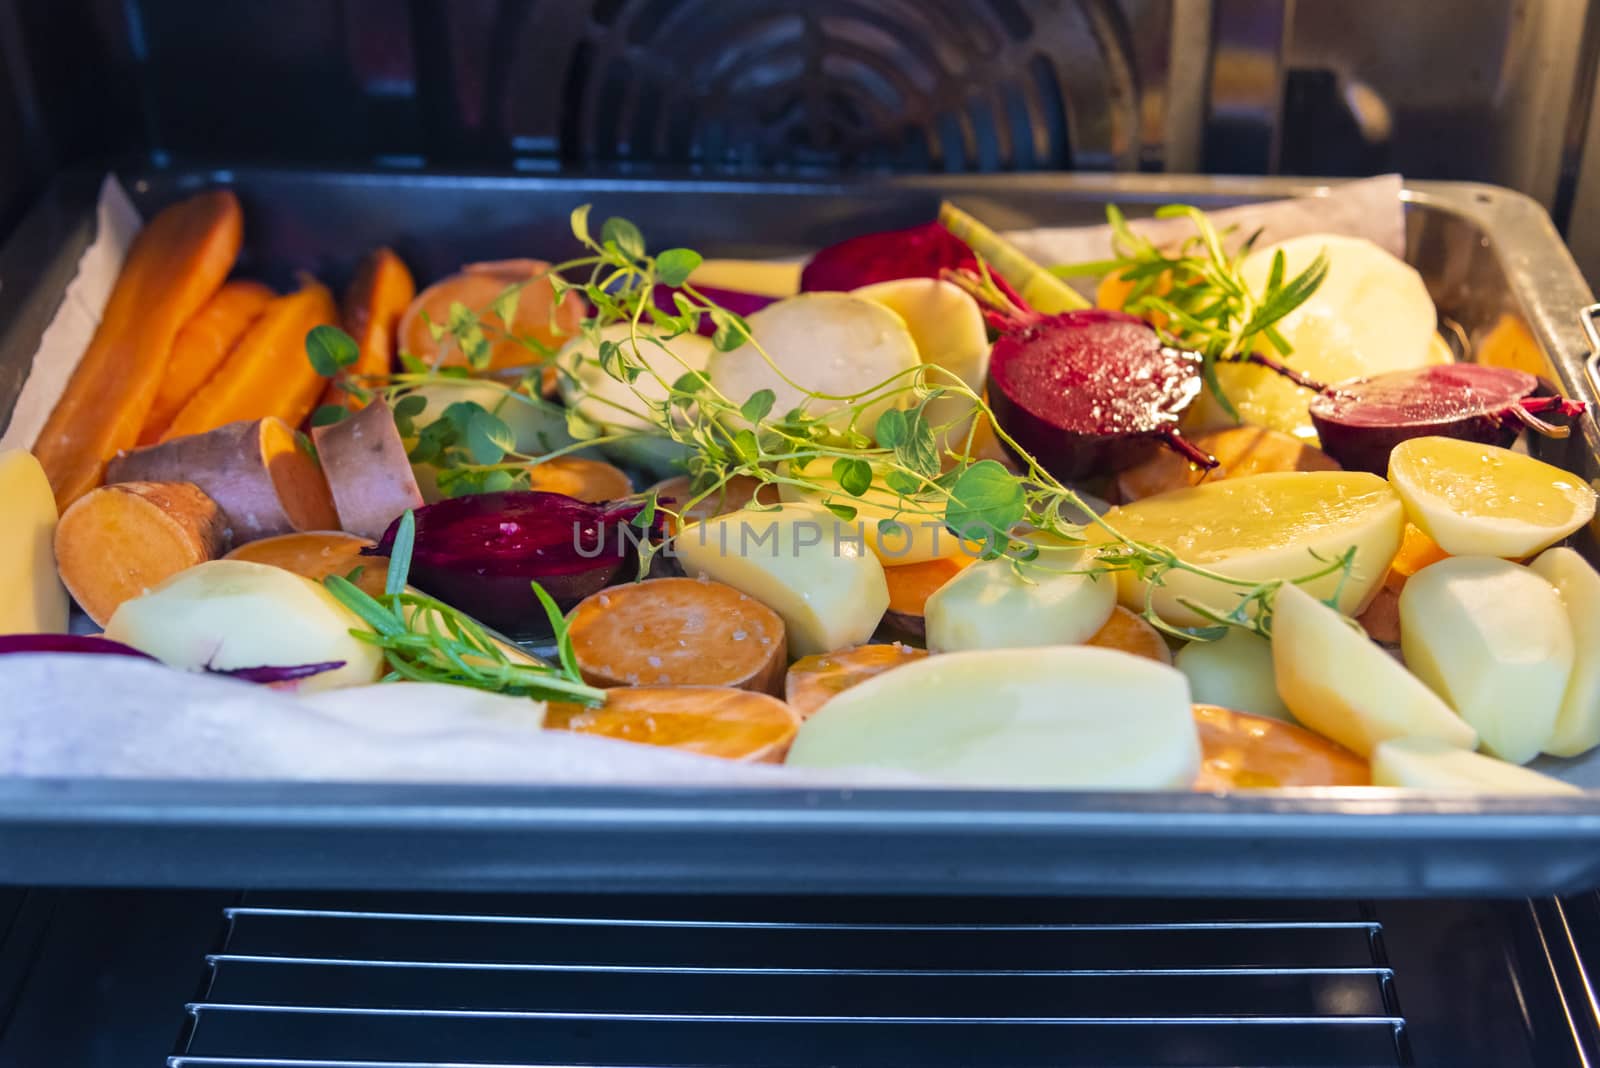 Cut raw vegetables before putting them in the oven. Carrots, potatoes, sweet potatoes, beets, kohlrabi, rosemary, garlic, hyssop